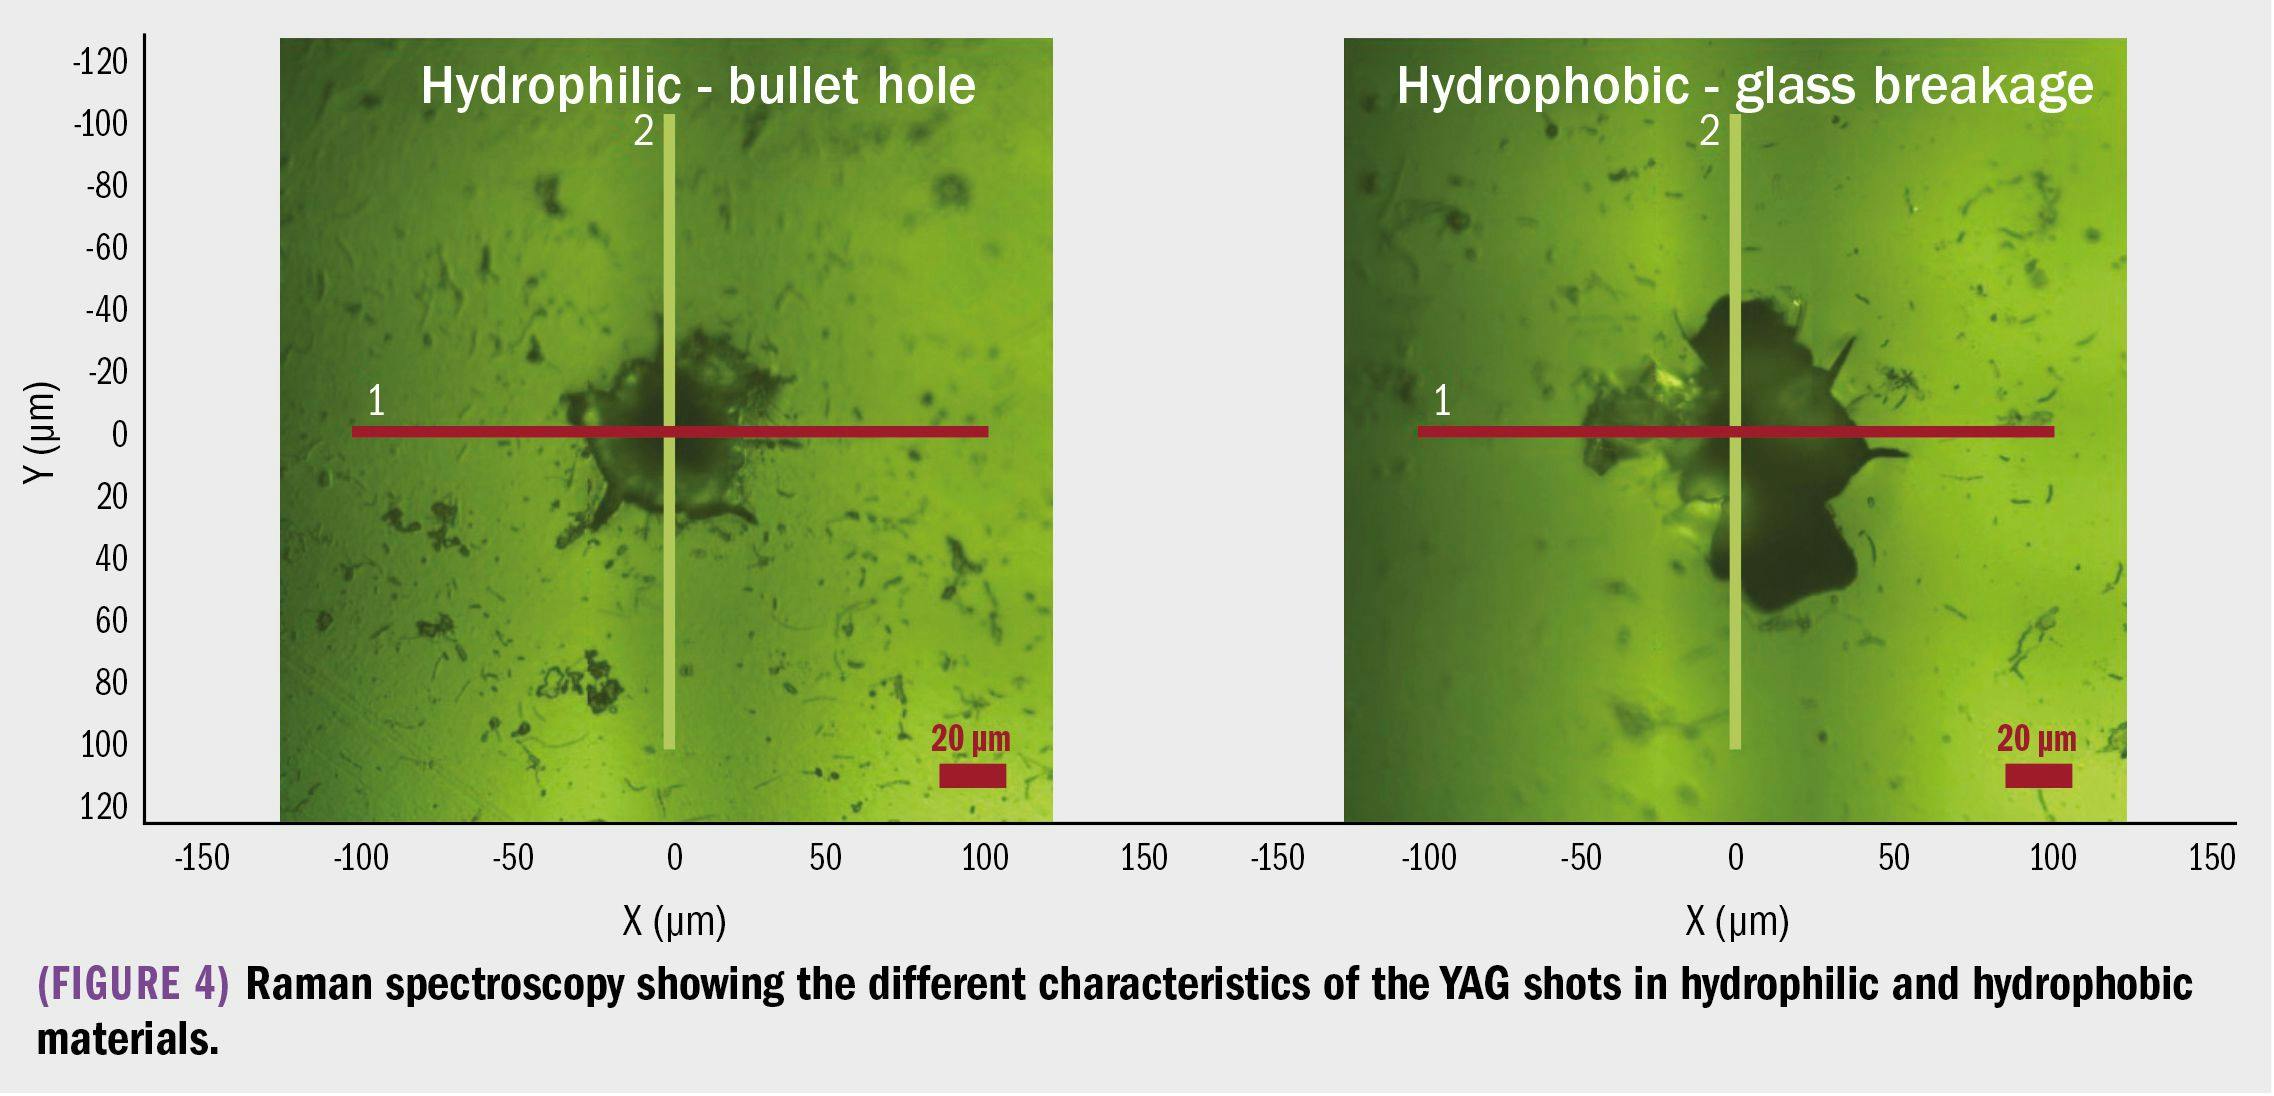 Raman spectroscopy showing the different characteristics of the YAG shots in hydrophilic and hydrophobic materials